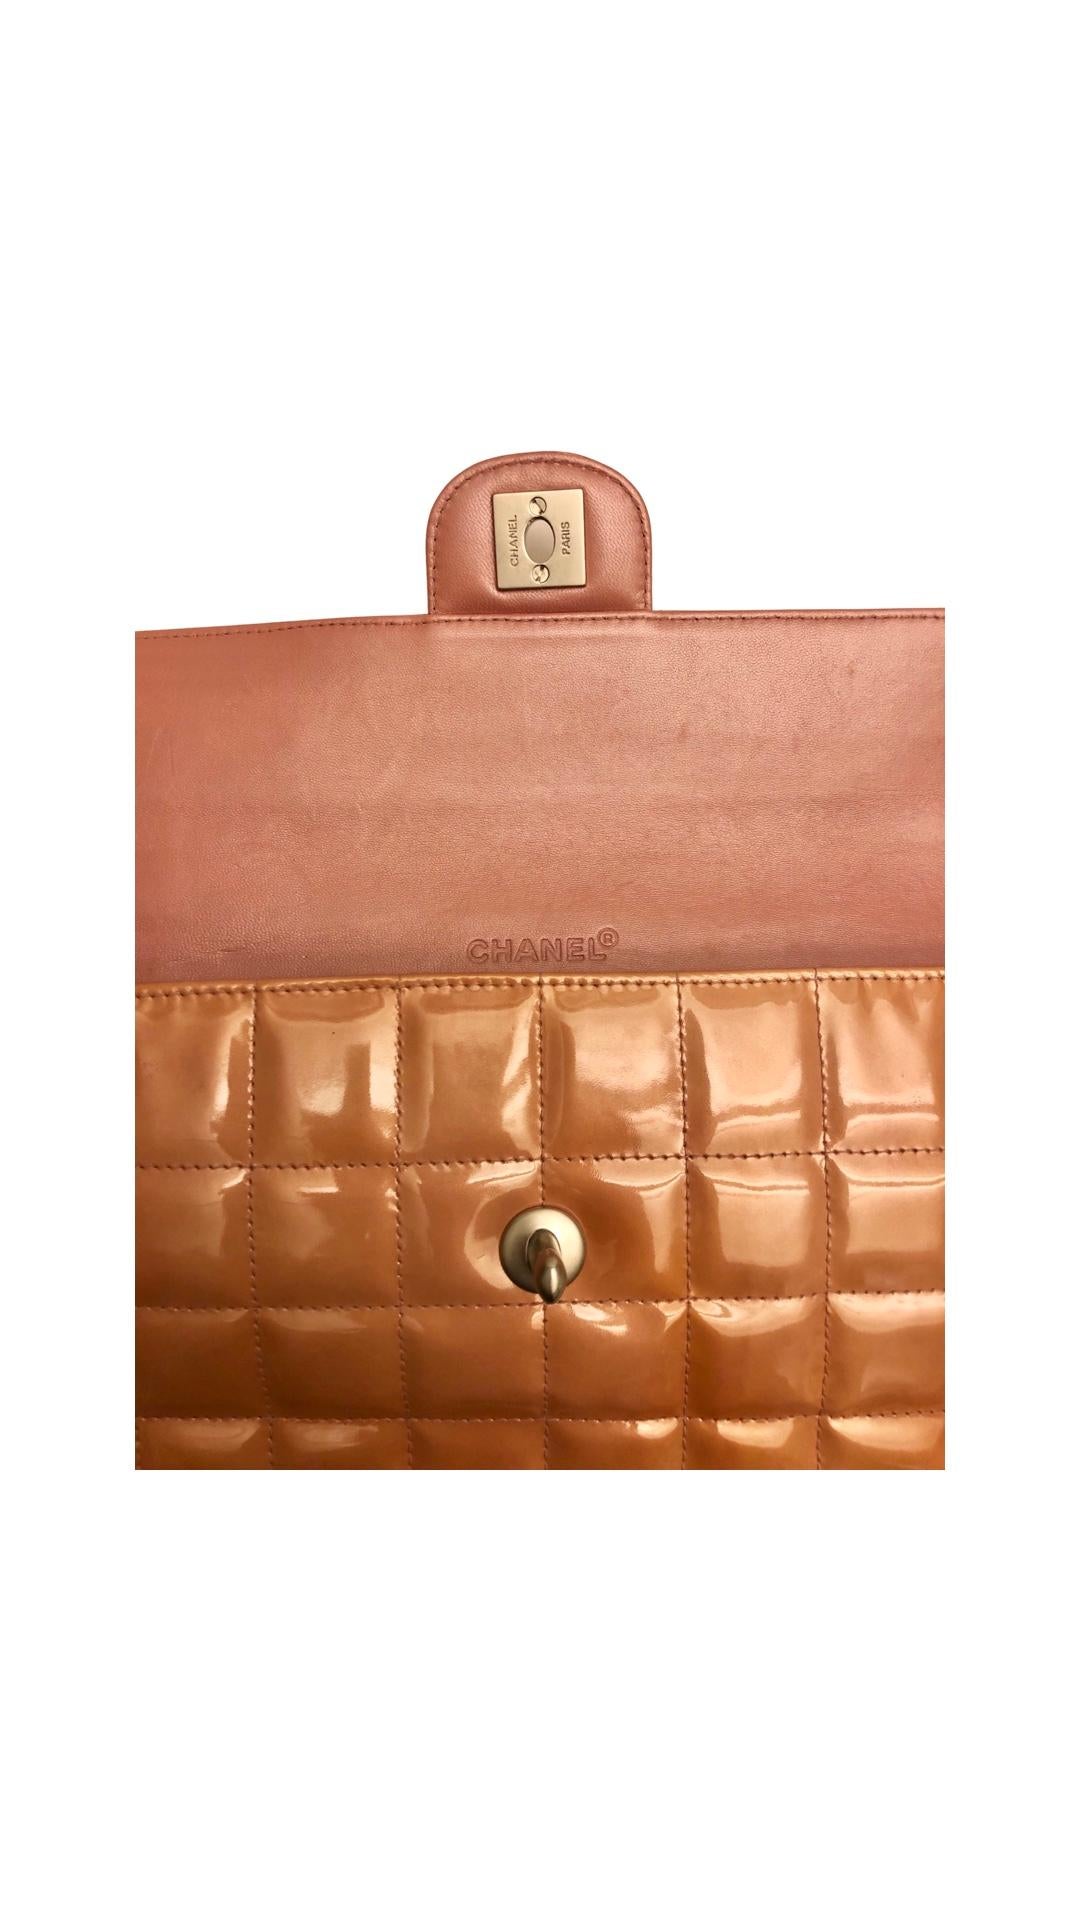 Chanel Patent Chocolate Bar Flap Shoulder Bag  In Excellent Condition For Sale In Sheung Wan, HK